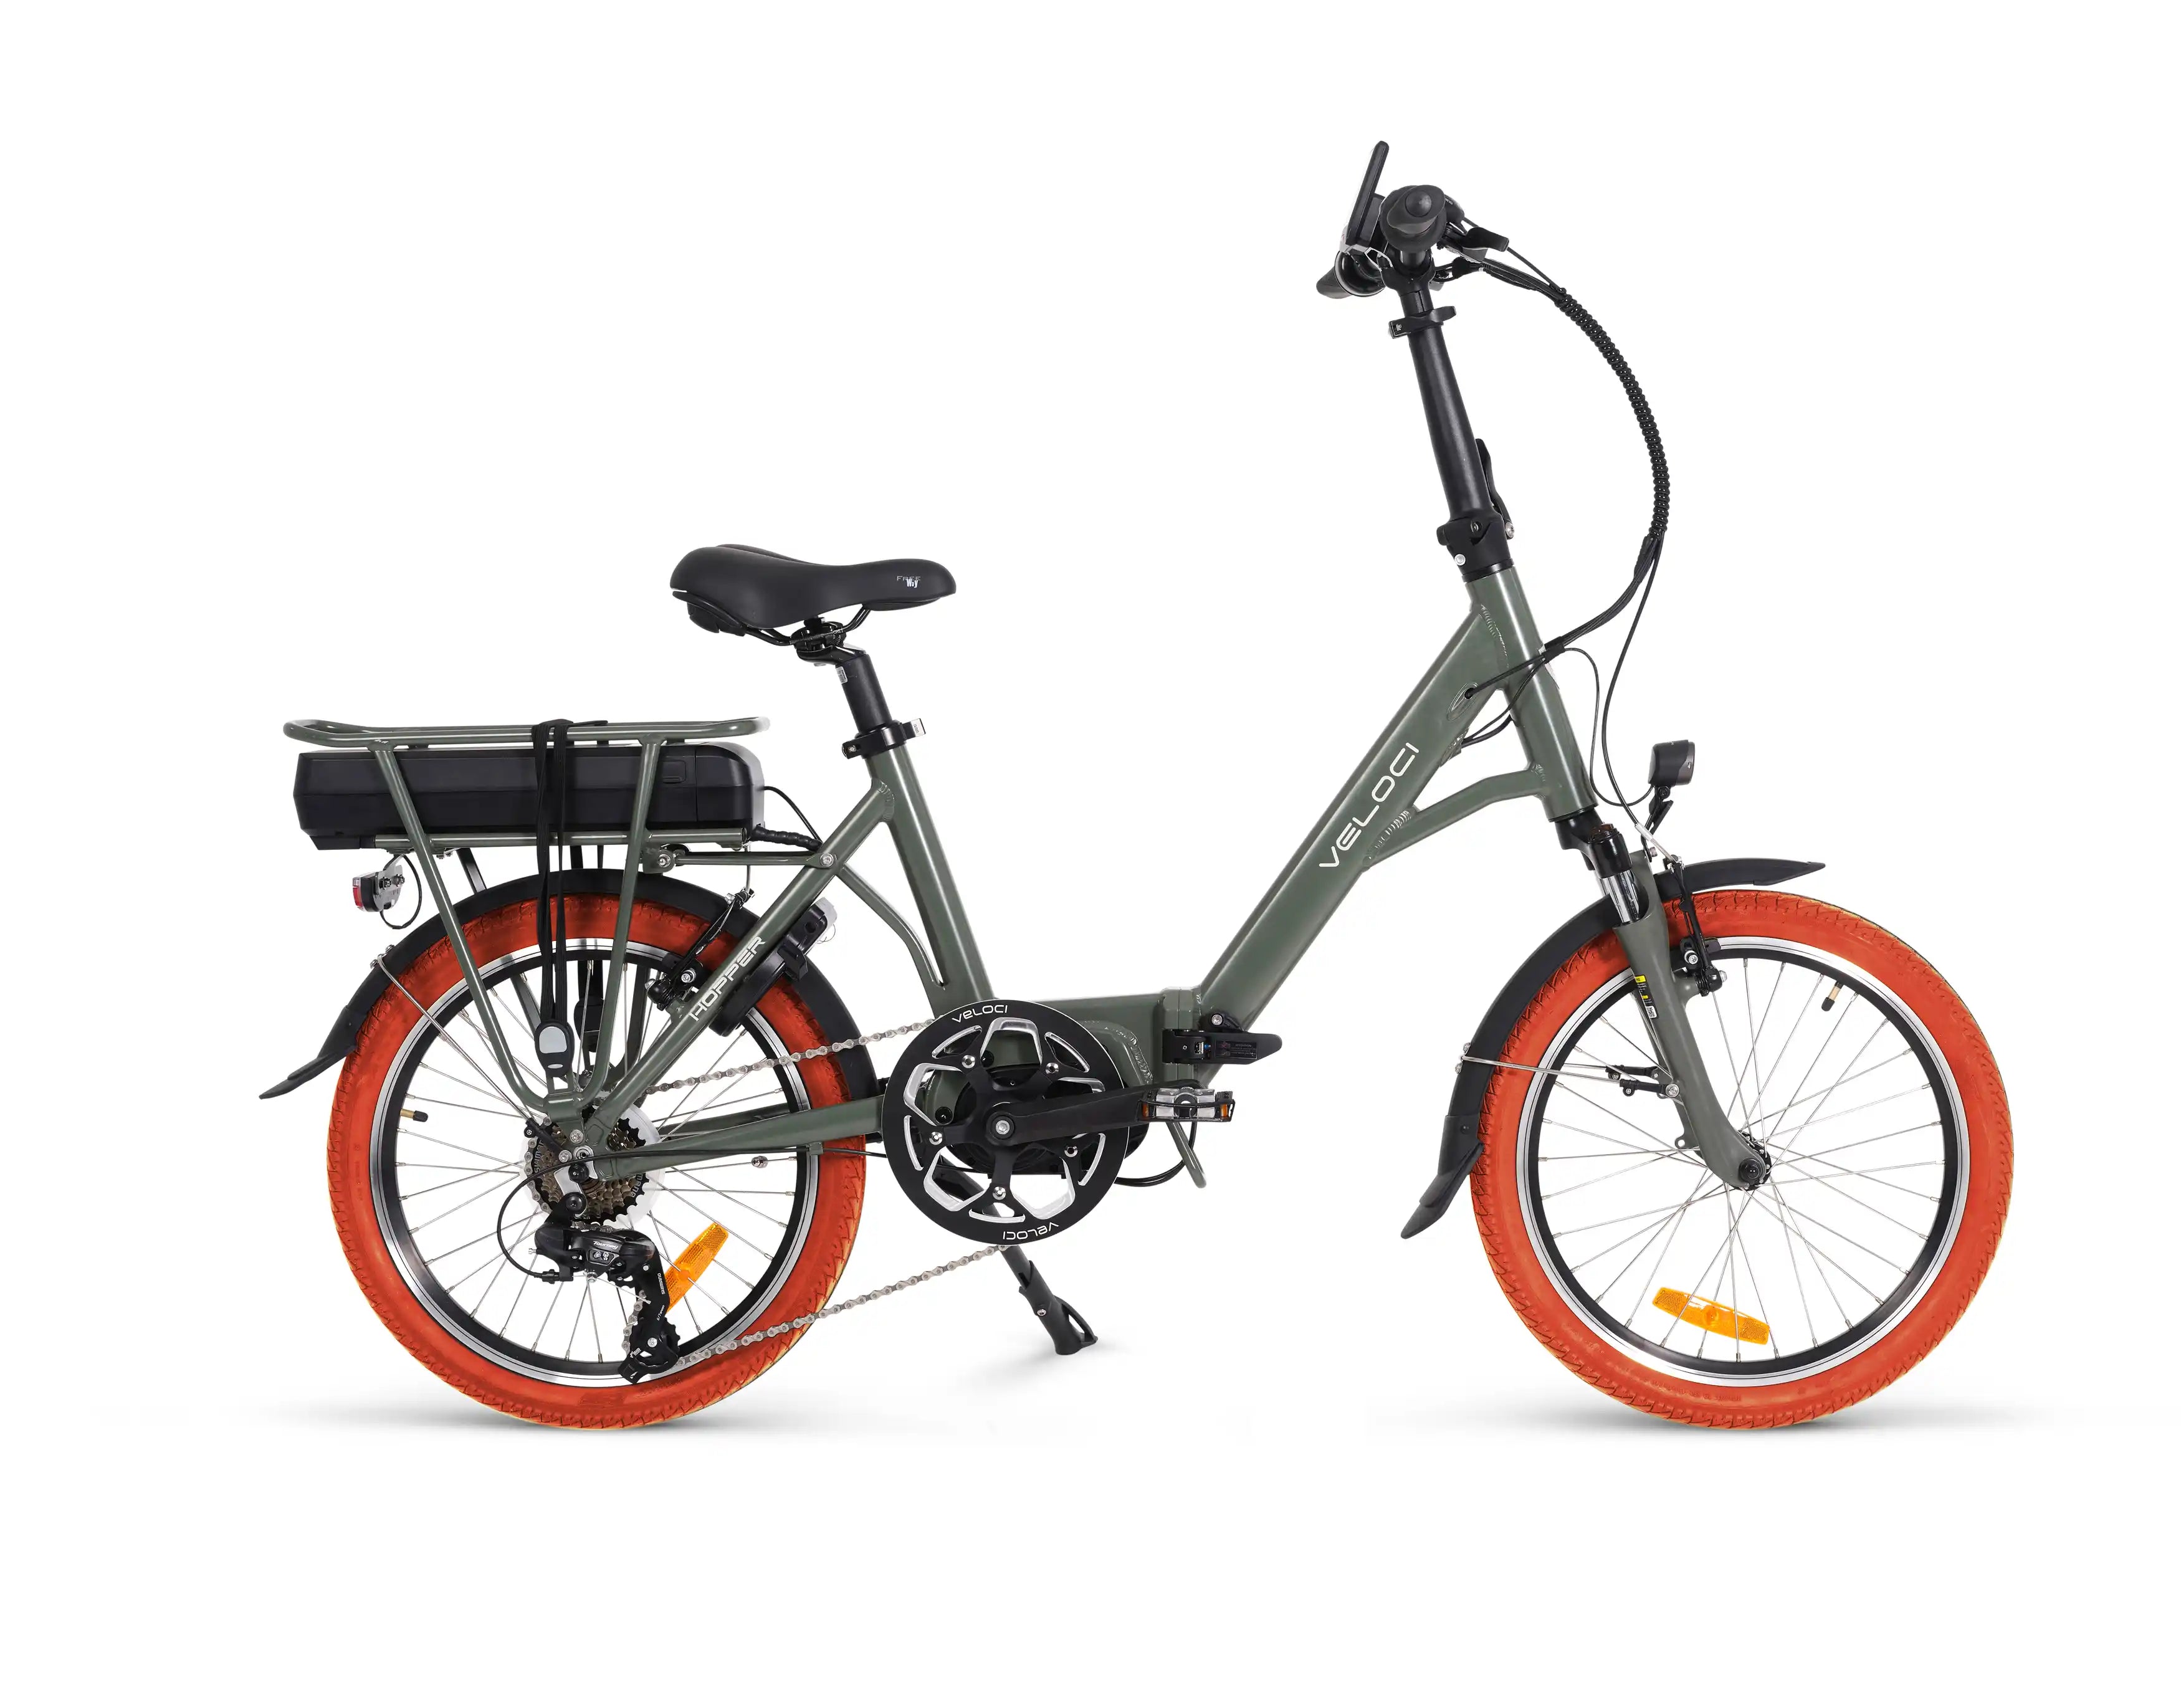 A product image of the Veloci Hopper folding electric bike from LeaseBike by Bleeper, showing the right side of the bike against a white background. The bike frame is an army green colour, while it has distinctive orange tyres - a feature of LeaseBike.